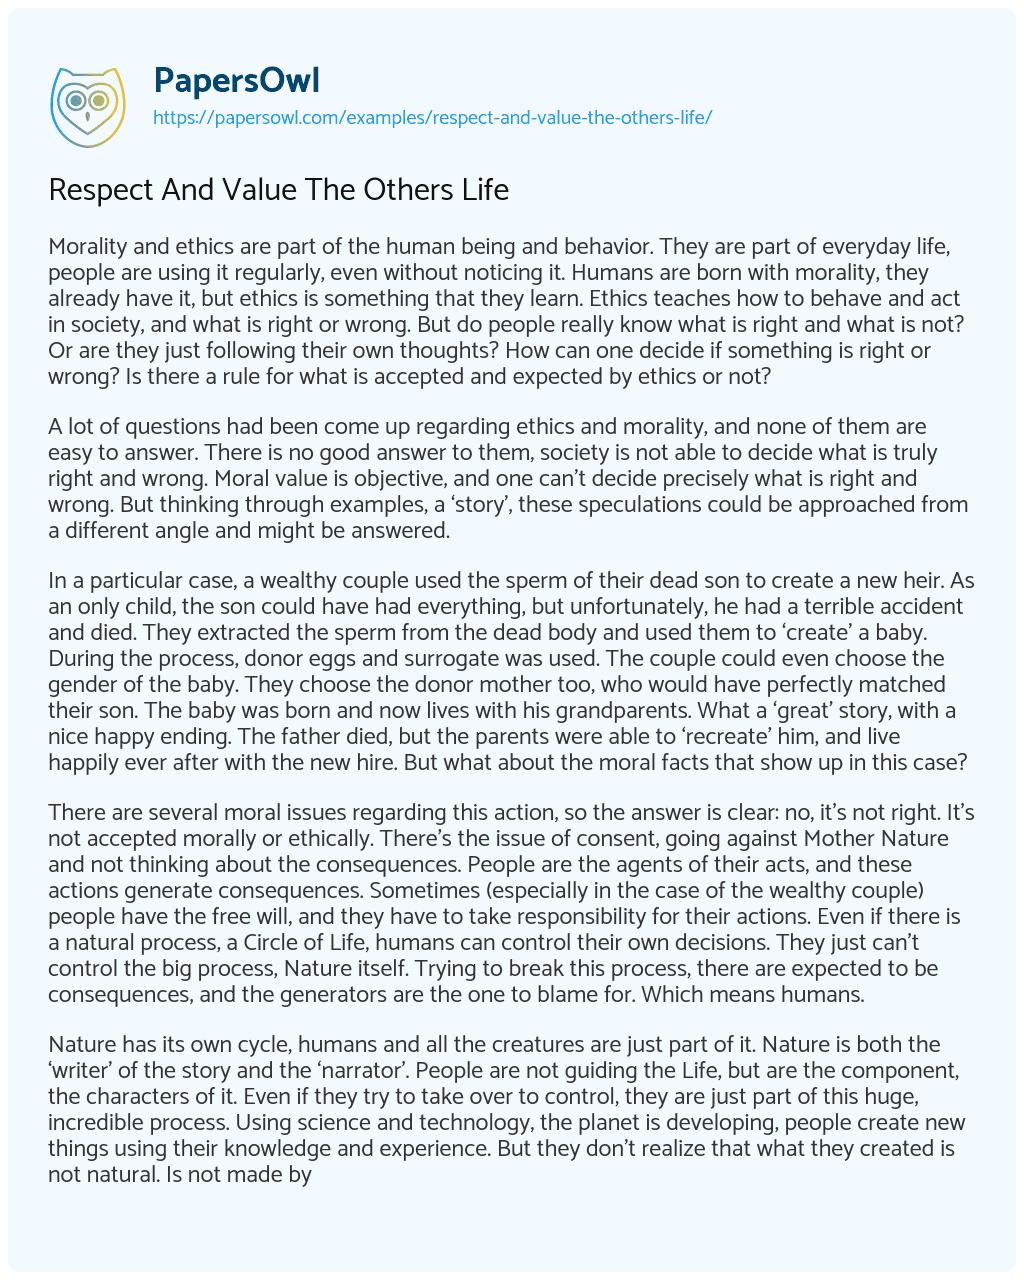 Essay on Respect and Value the Others Life